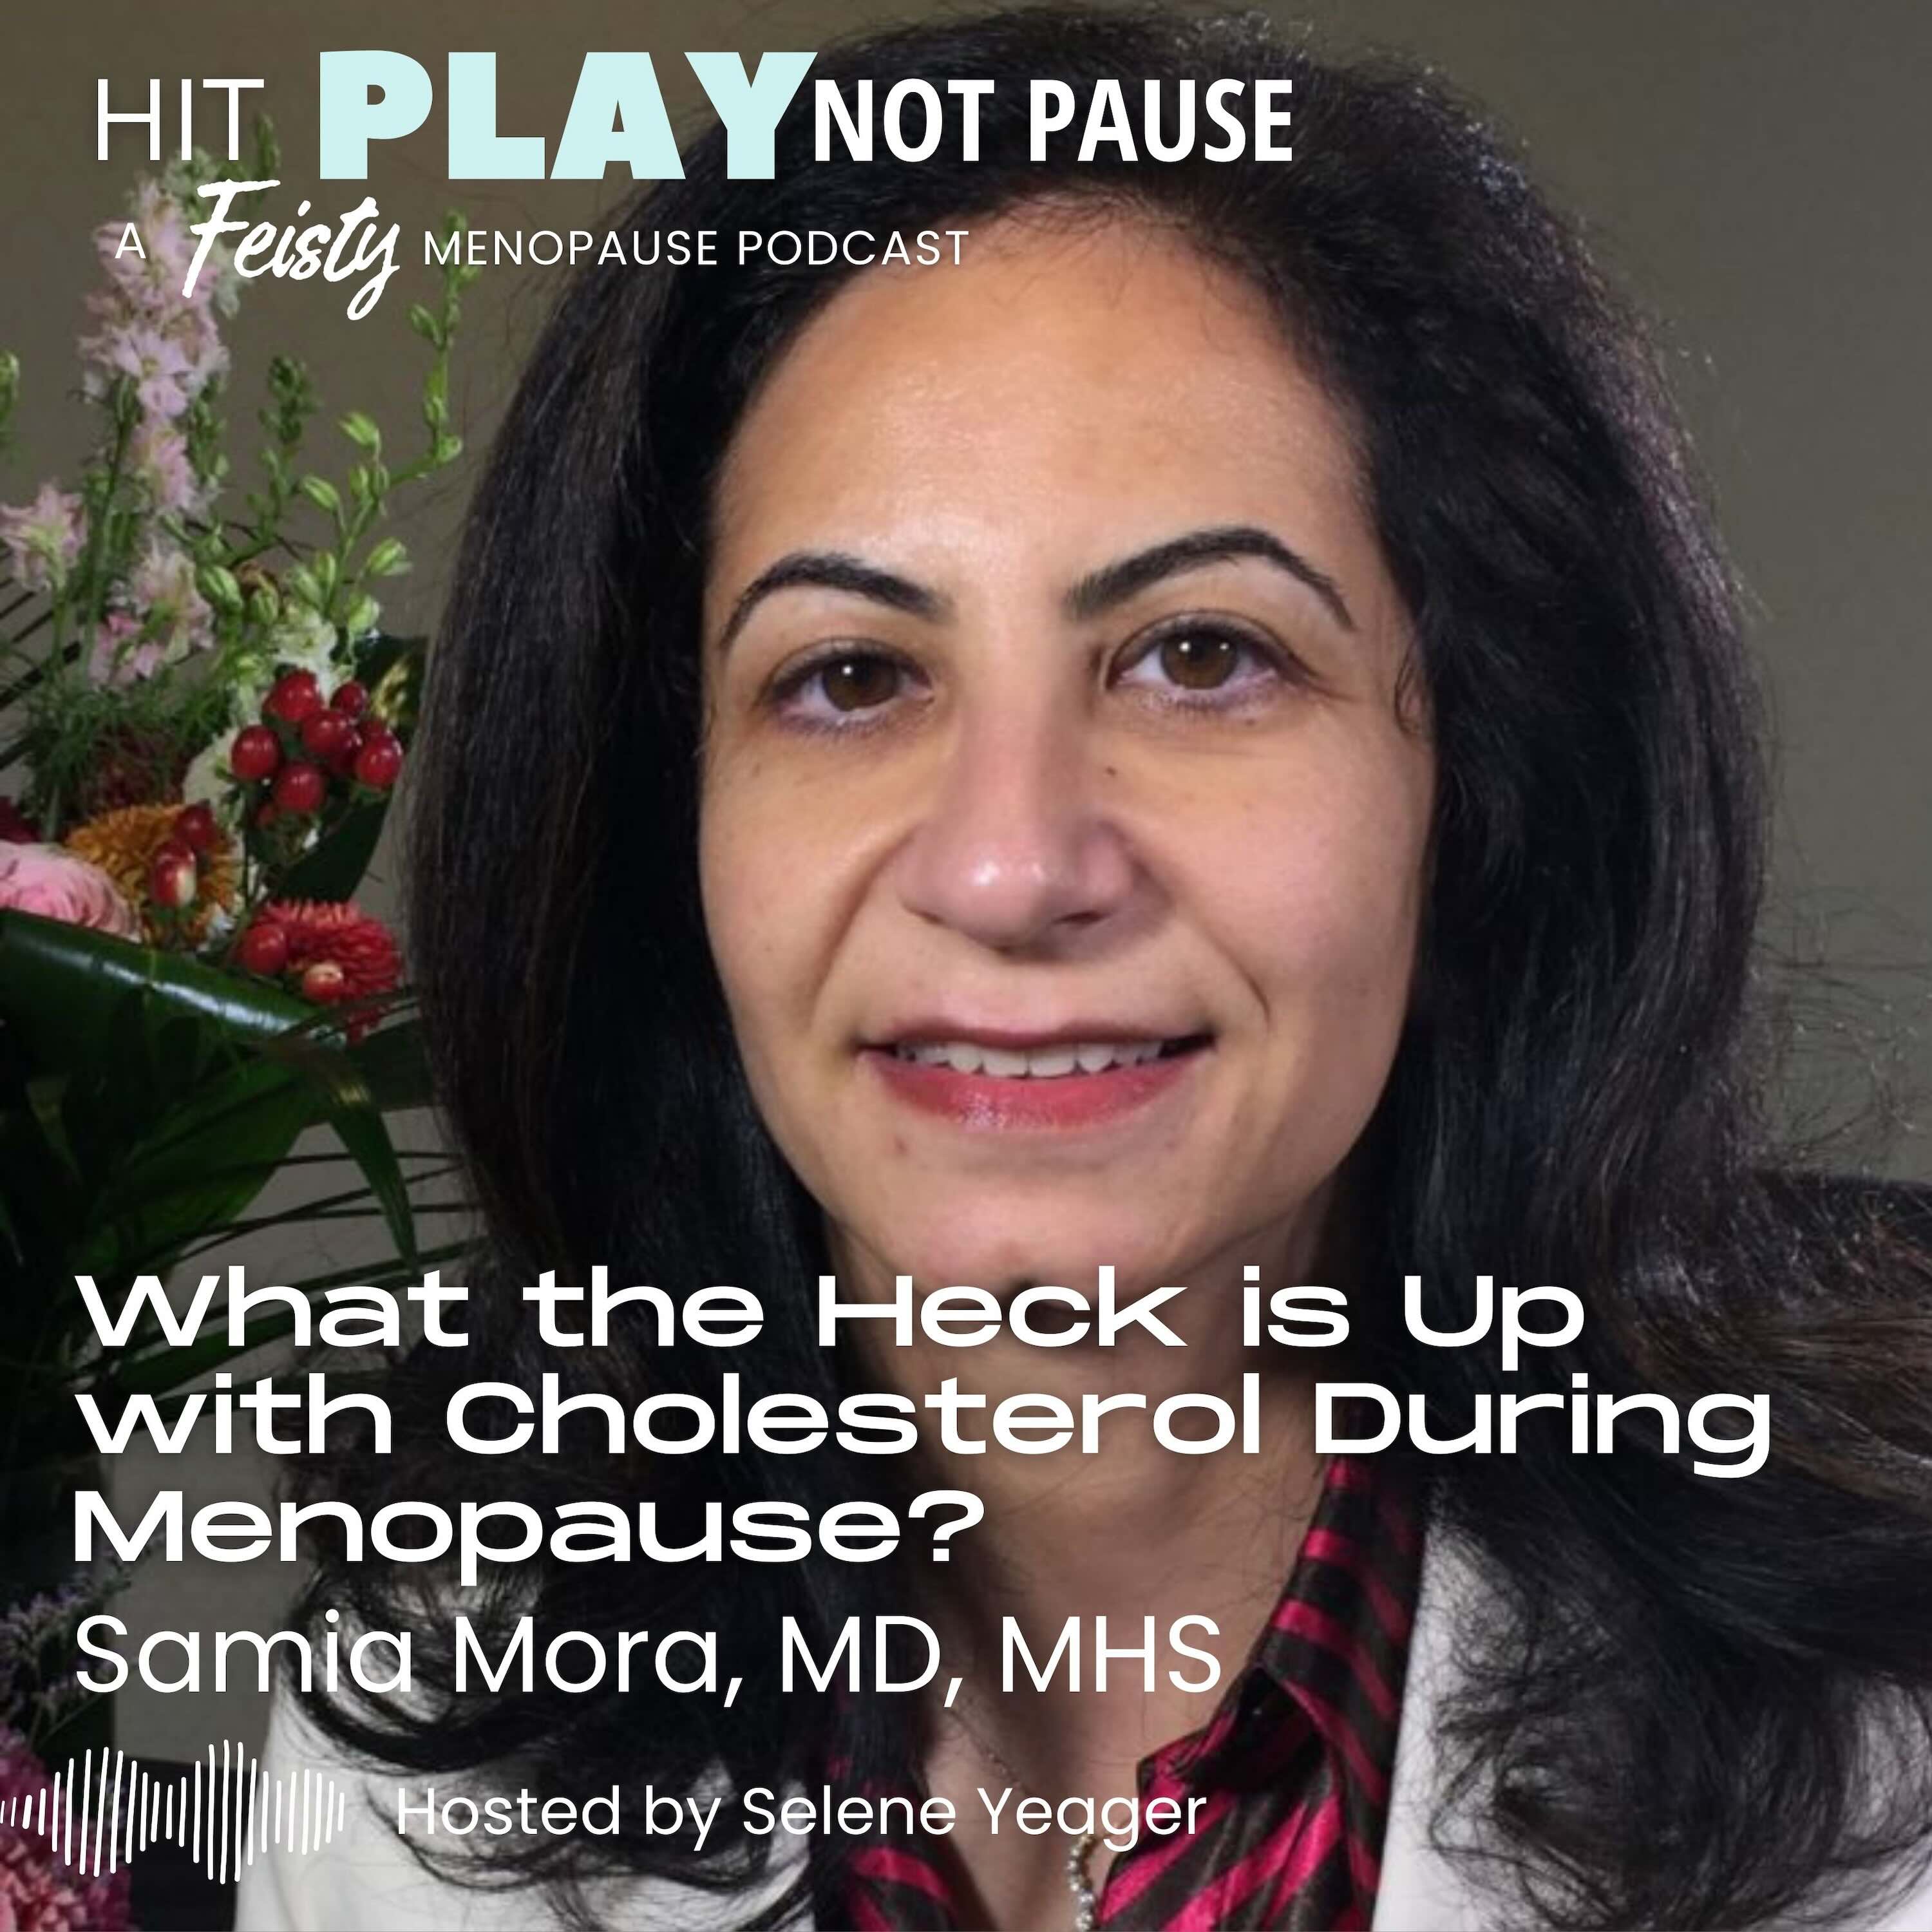 What the Heck is Up with Cholesterol During Menopause? with Samia Mora, MD, MHS (Episode 167)